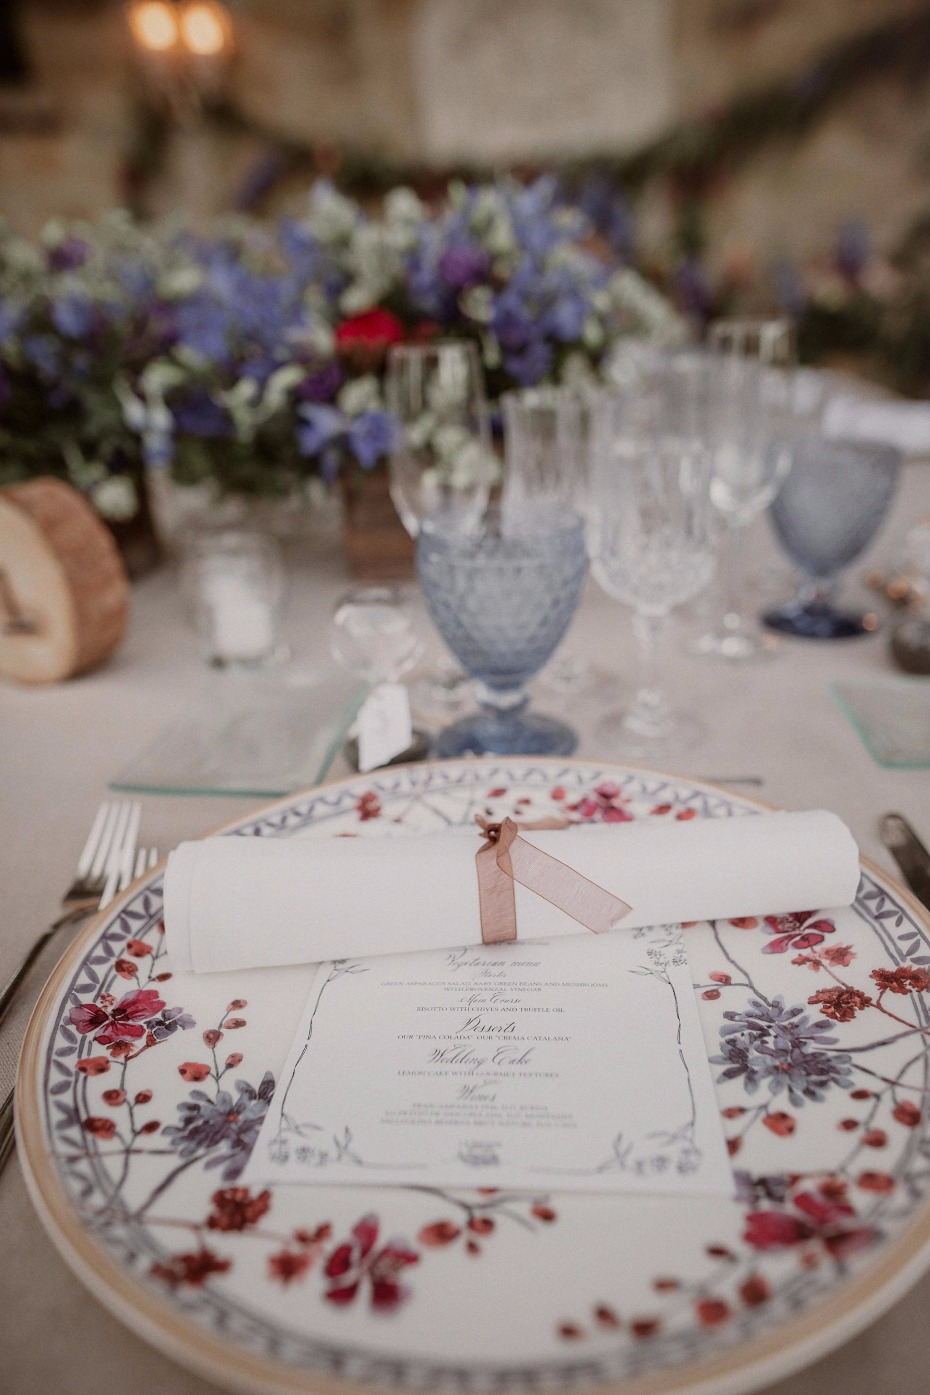 Vintage china for the reception